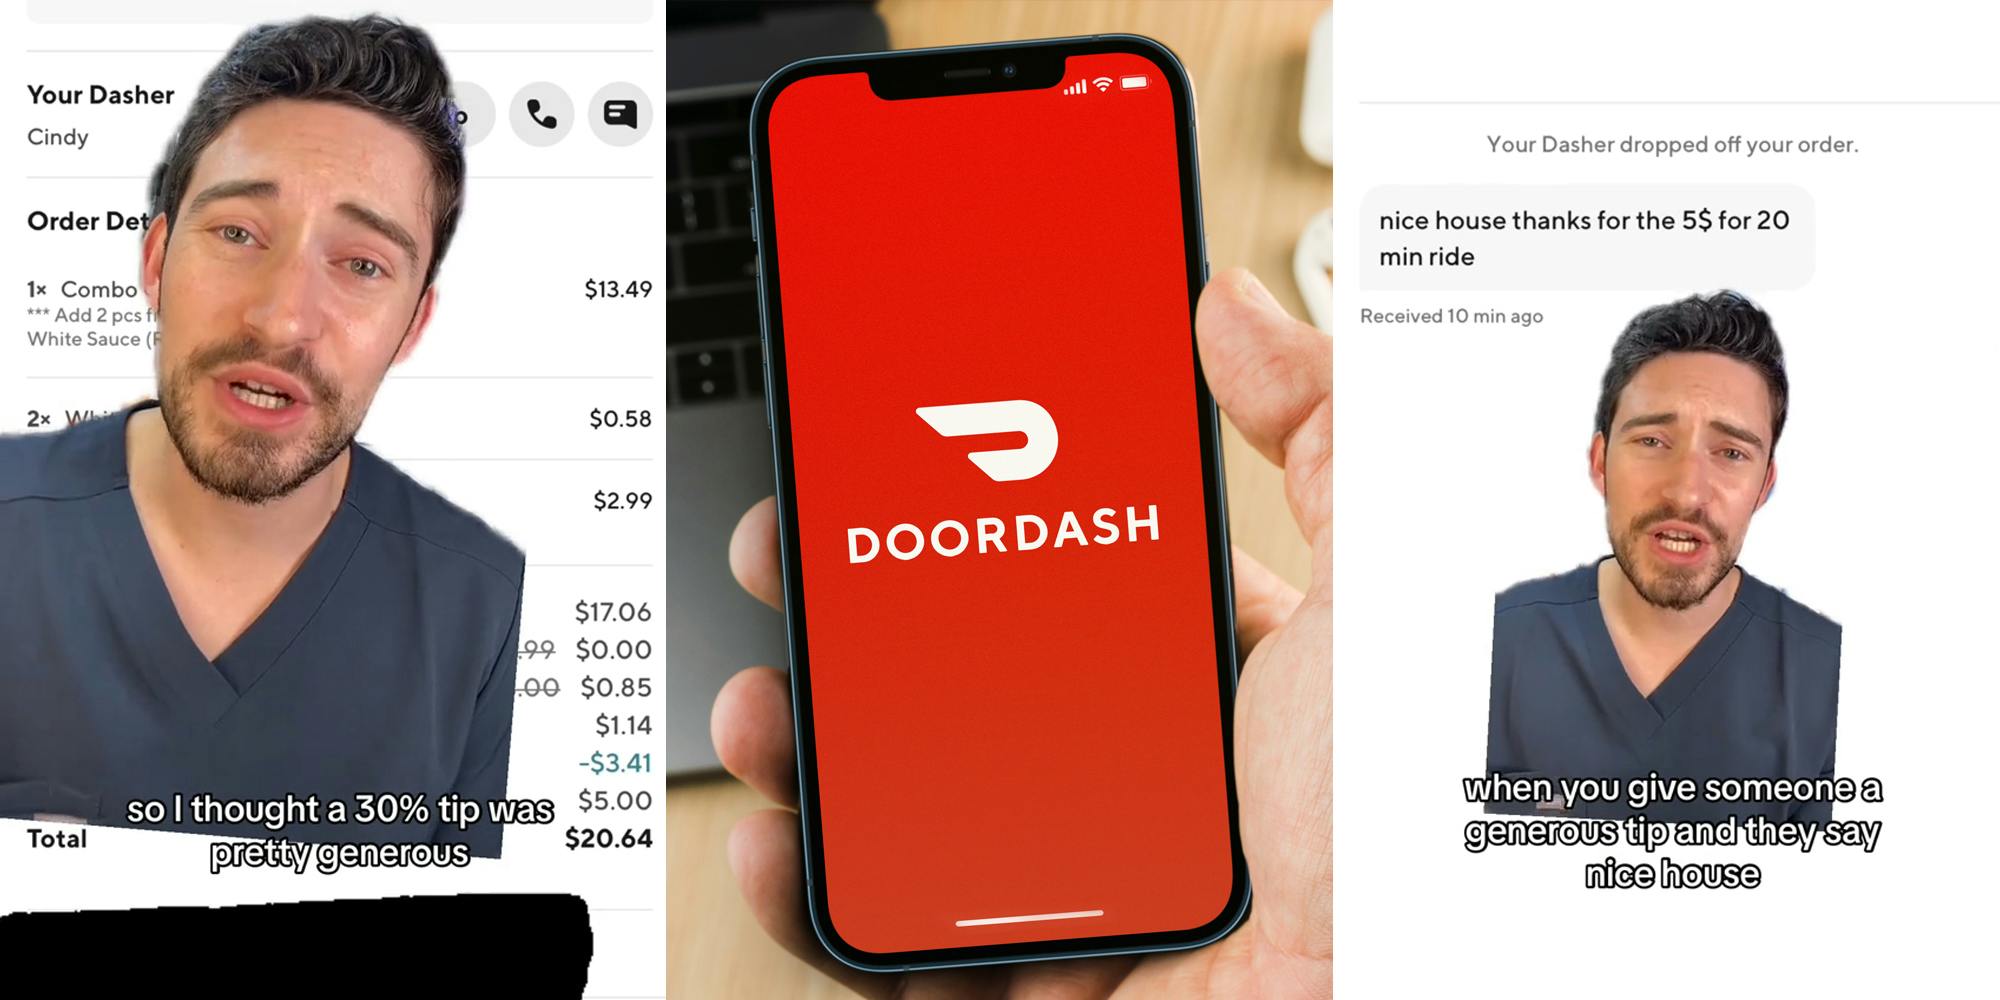 DoorDash customer greenscreen TikTok over DoorDash order with caption "so I thought a 30% tip was pretty generous" (l) DoorDash app on phone screen in hand (c) DoorDash customer greenscreen TikTok over DoorDash order with caption "when you give someone a generous tip and they say nice house" (r)